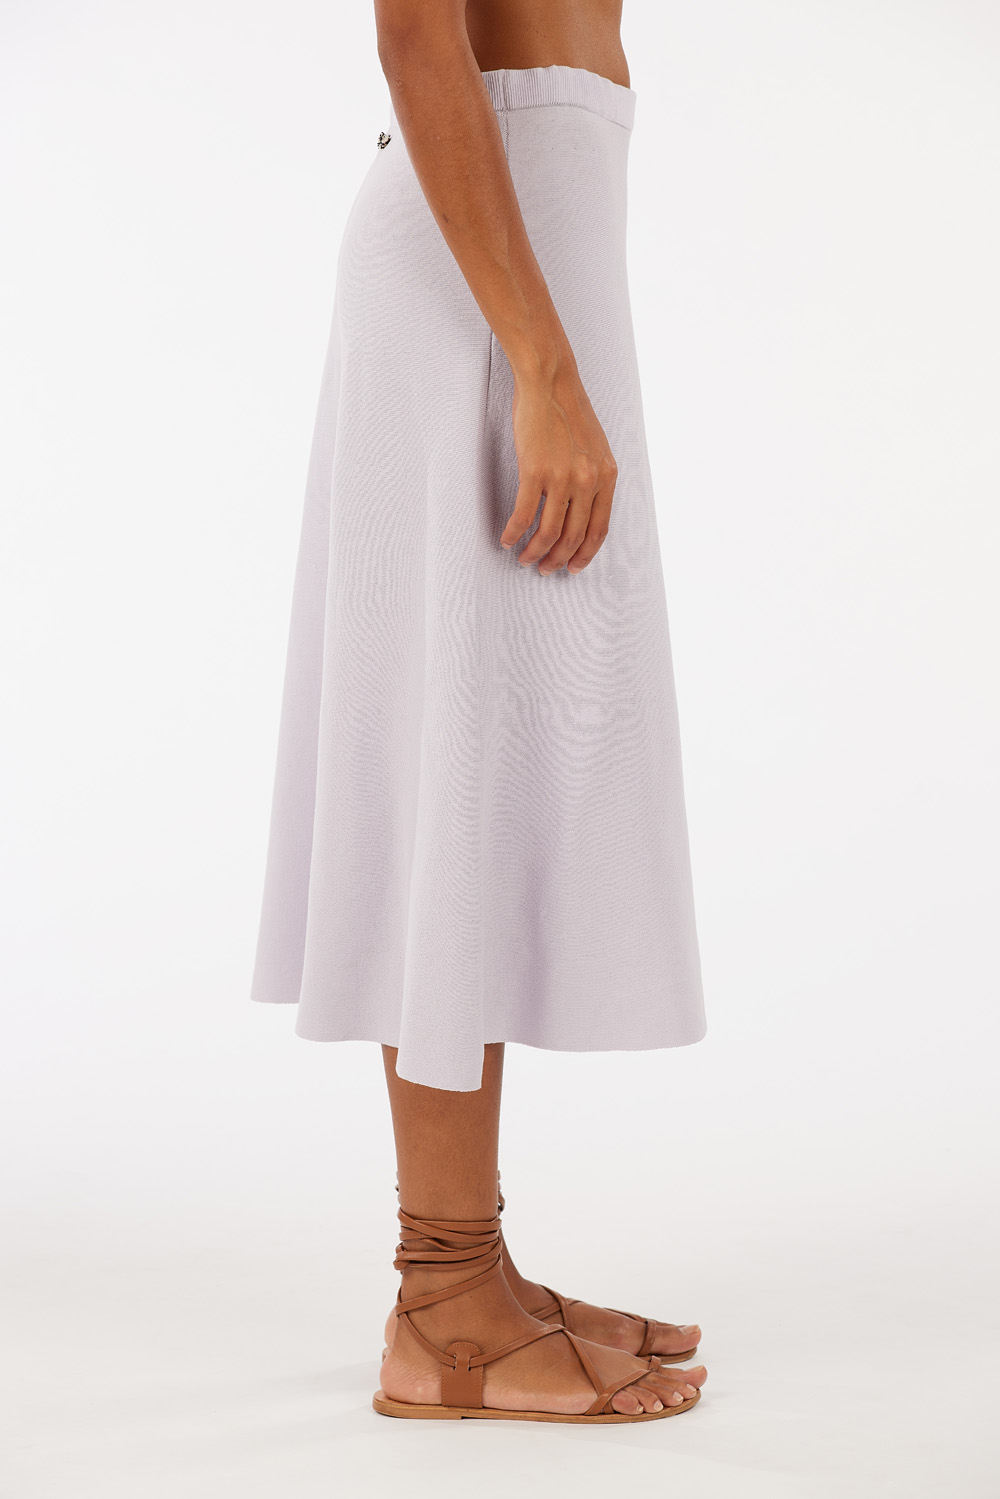 Flared skirt in 100% cotton crêpe